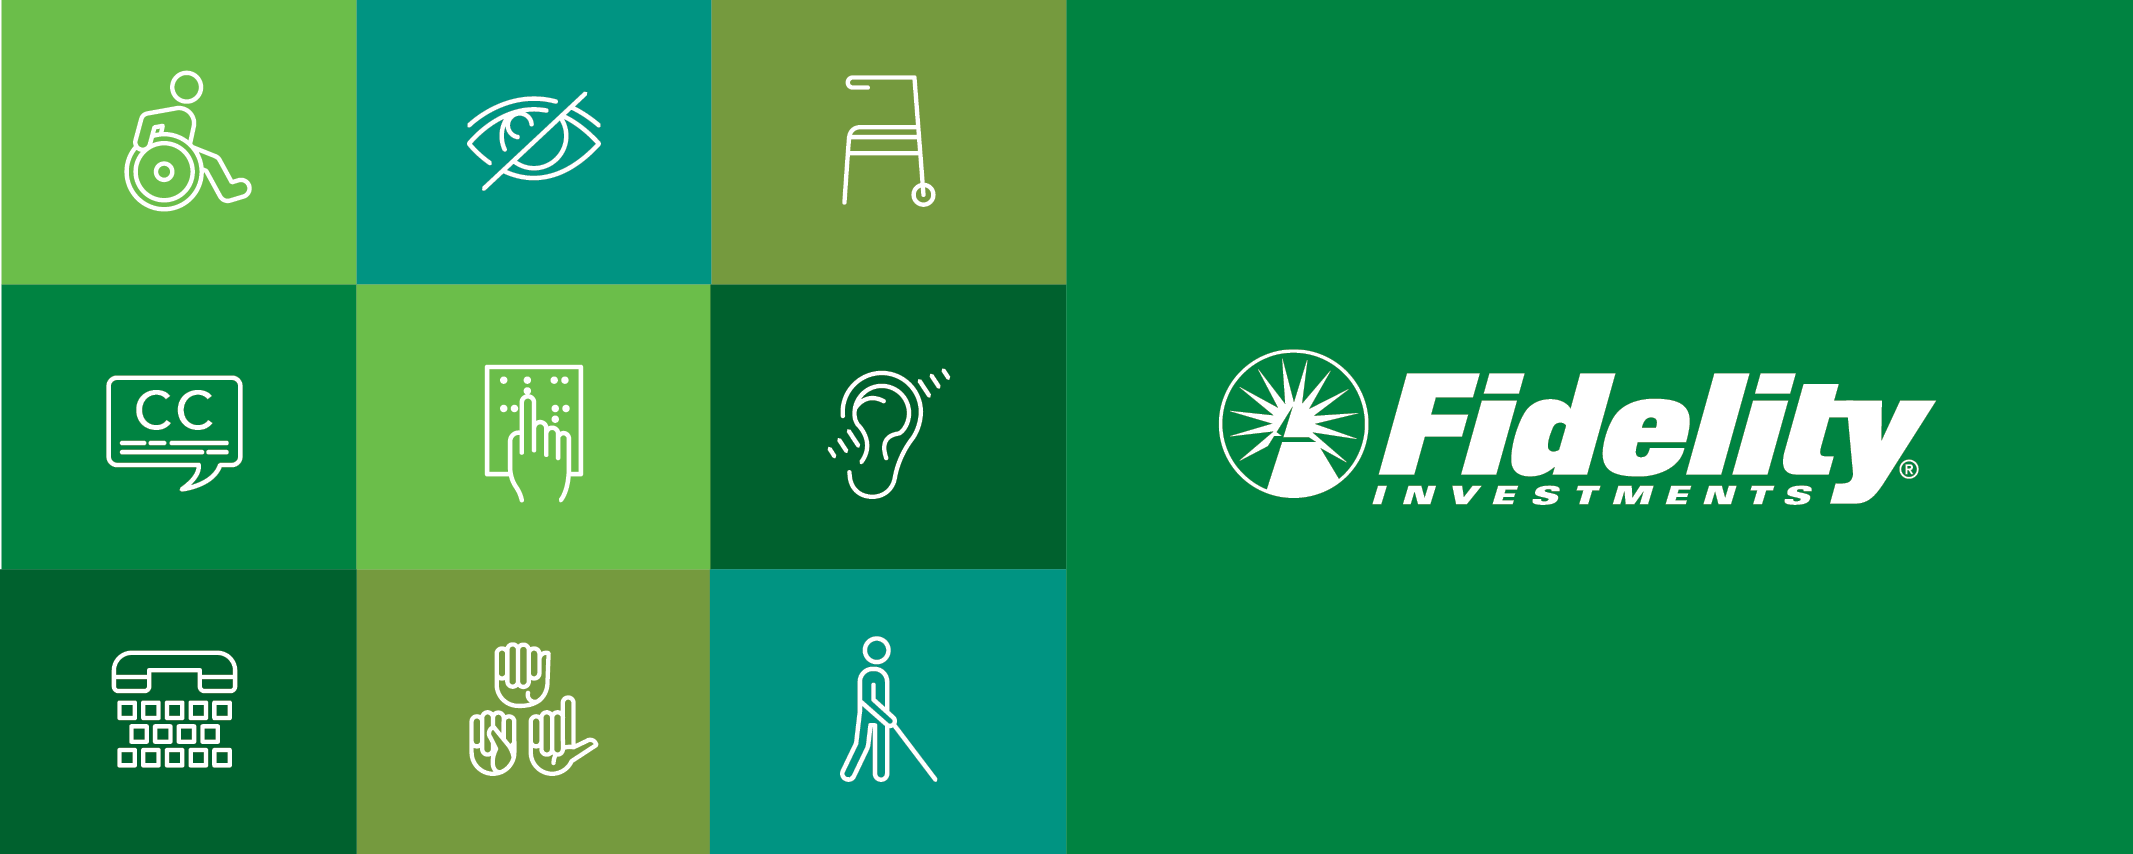 Banner with Fidelity name and logo, along with icons representing accessibility: a silhouette of a person who is blind walking with a cane, a hearing aid, a wheelchair, closed captions, etc.